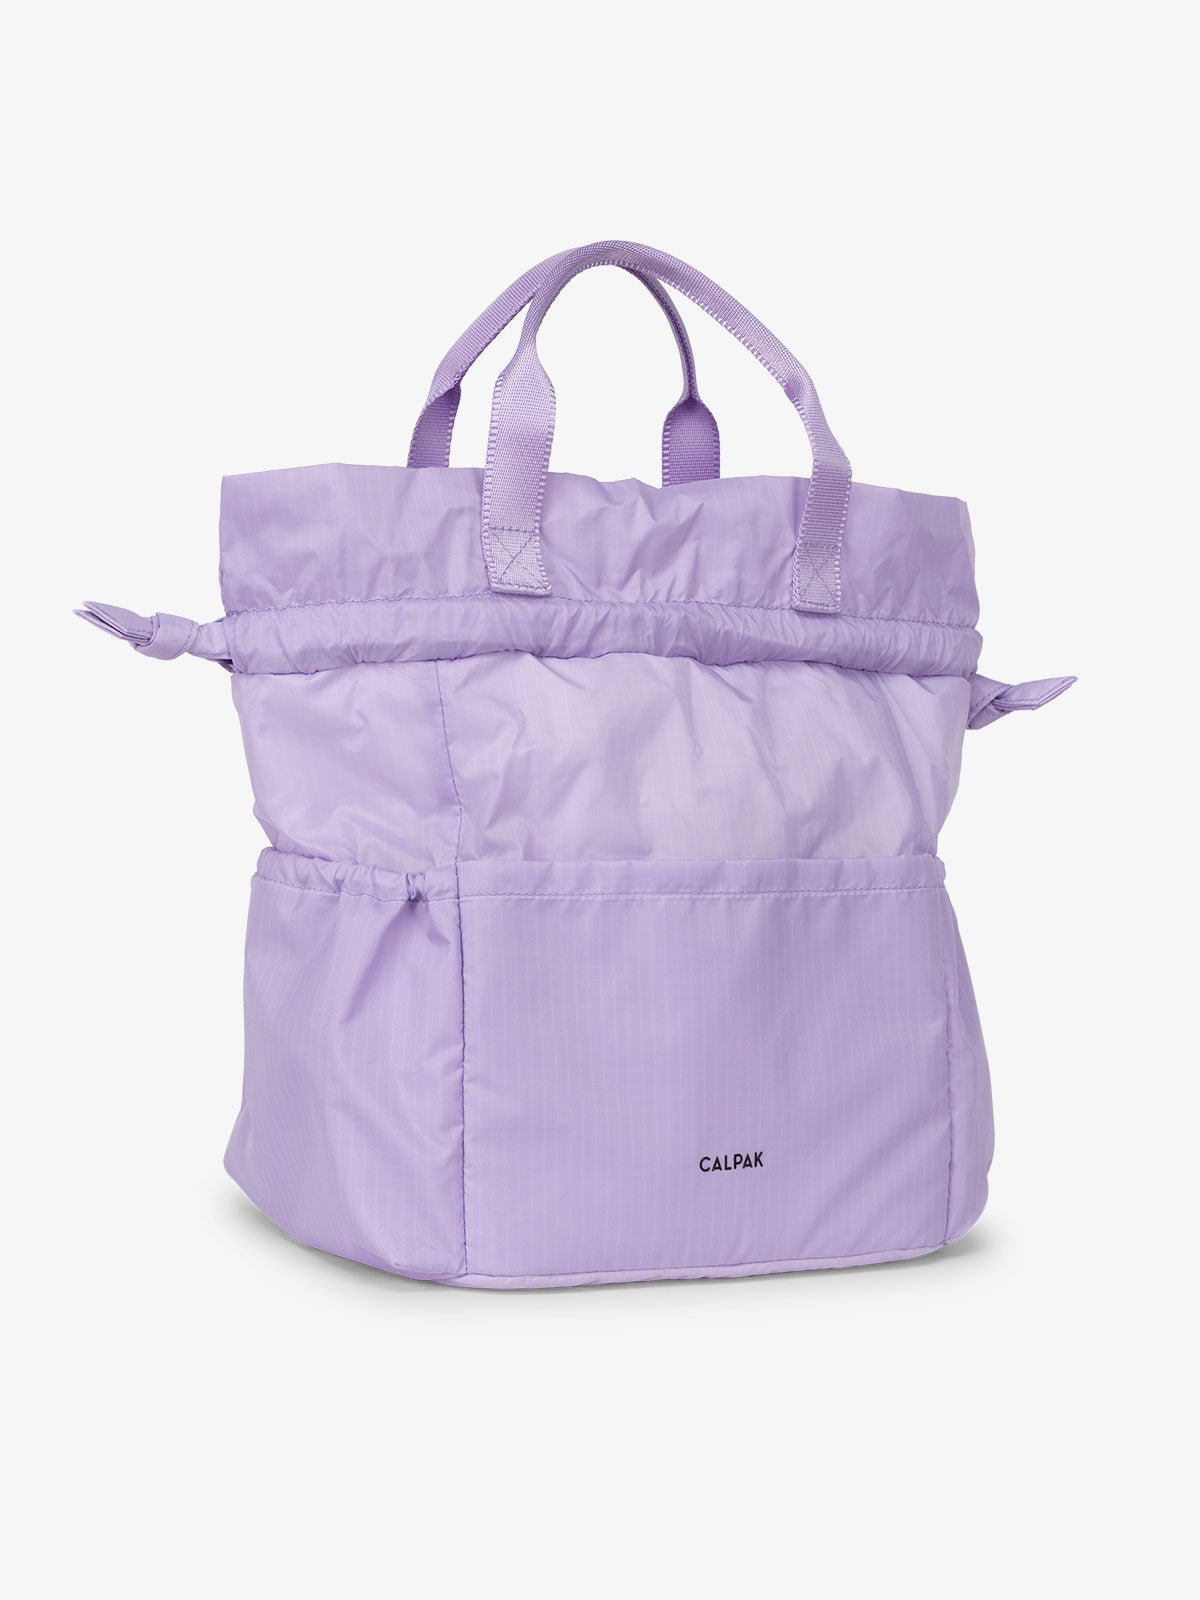 CALPAK insulated lunch bag in purple orchid